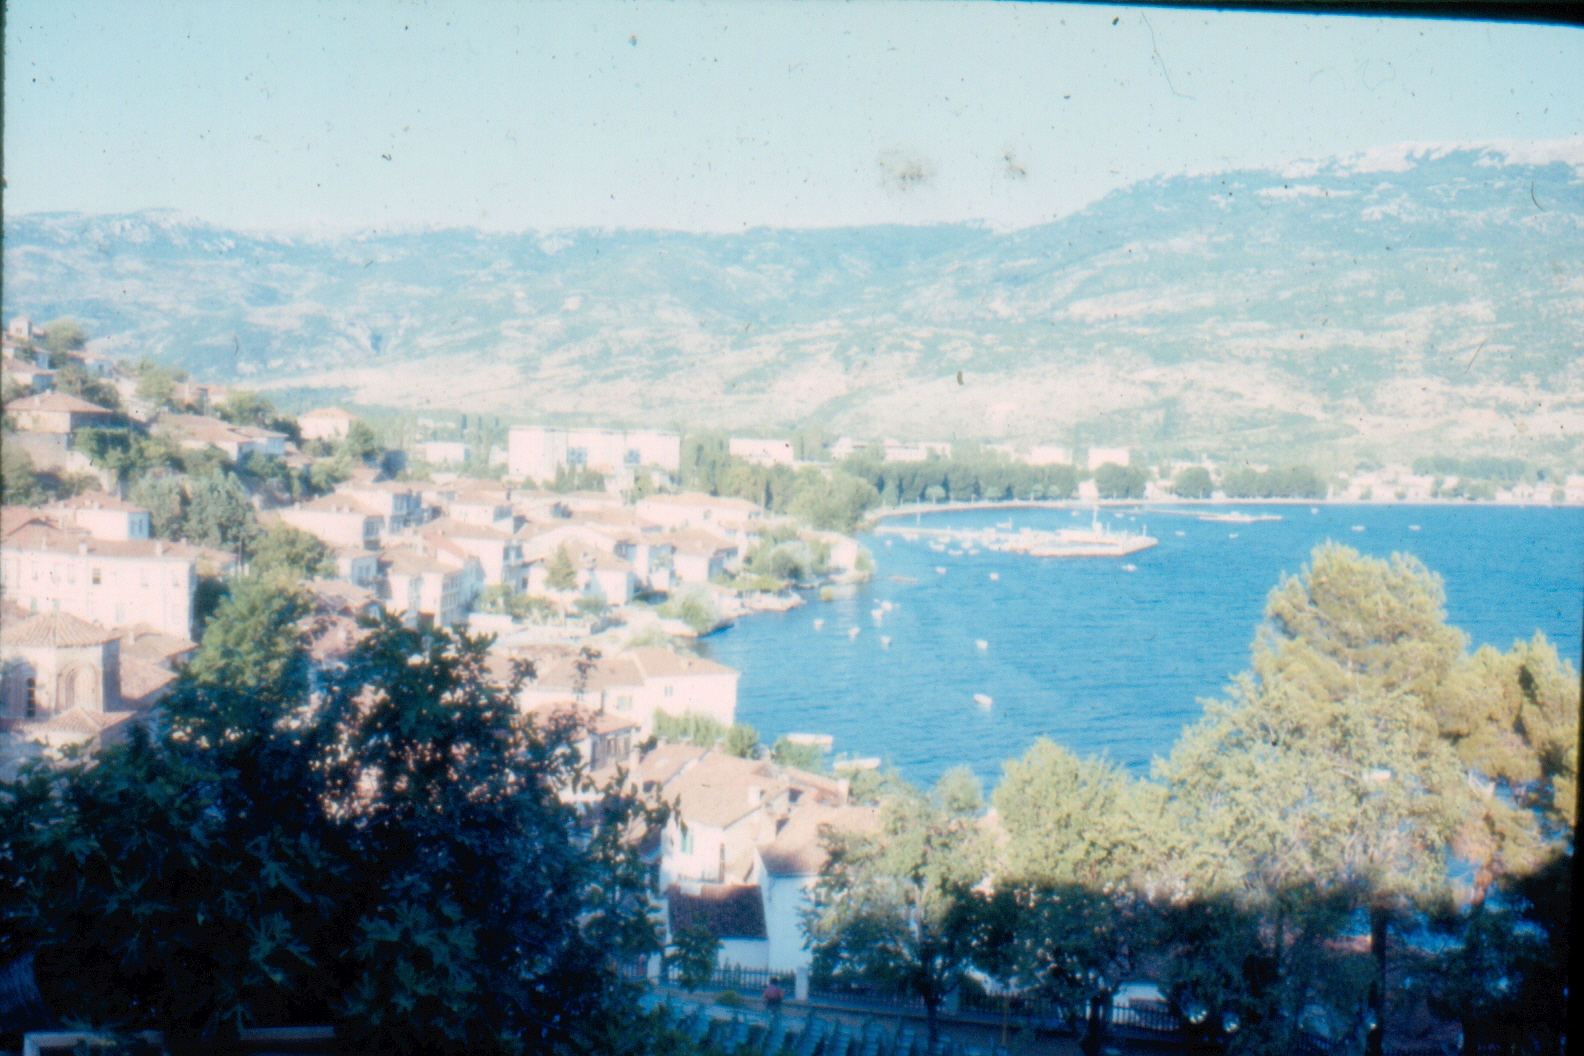 The bay near the town of Ohrid, Republic of Northern Macedonia, 1968